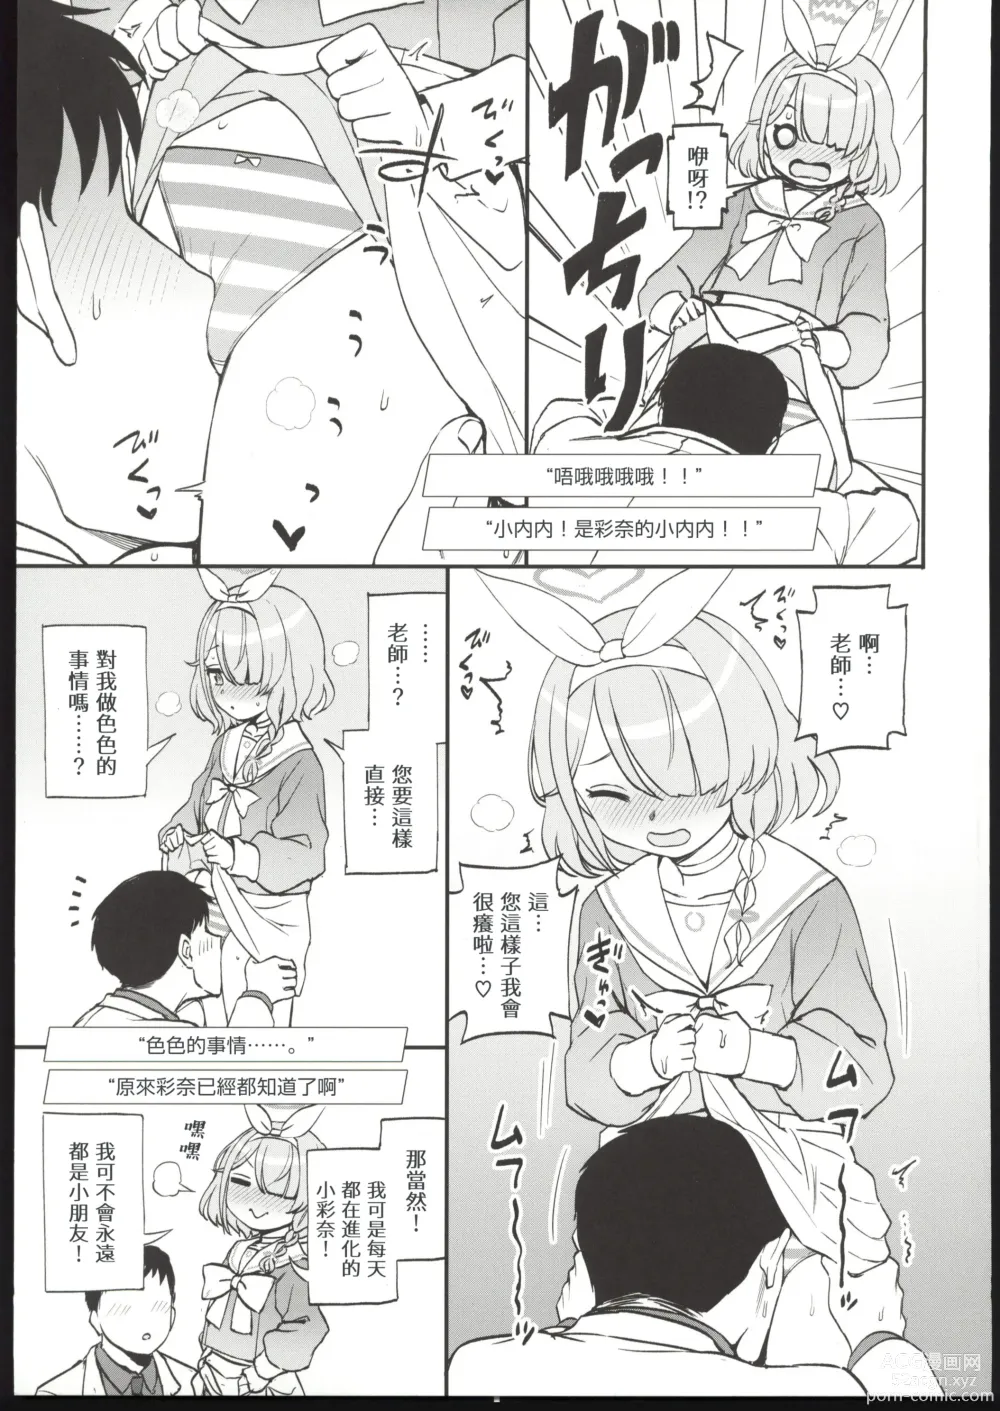 Page 4 of doujinshi 粉紅♥檔案 Vol.01